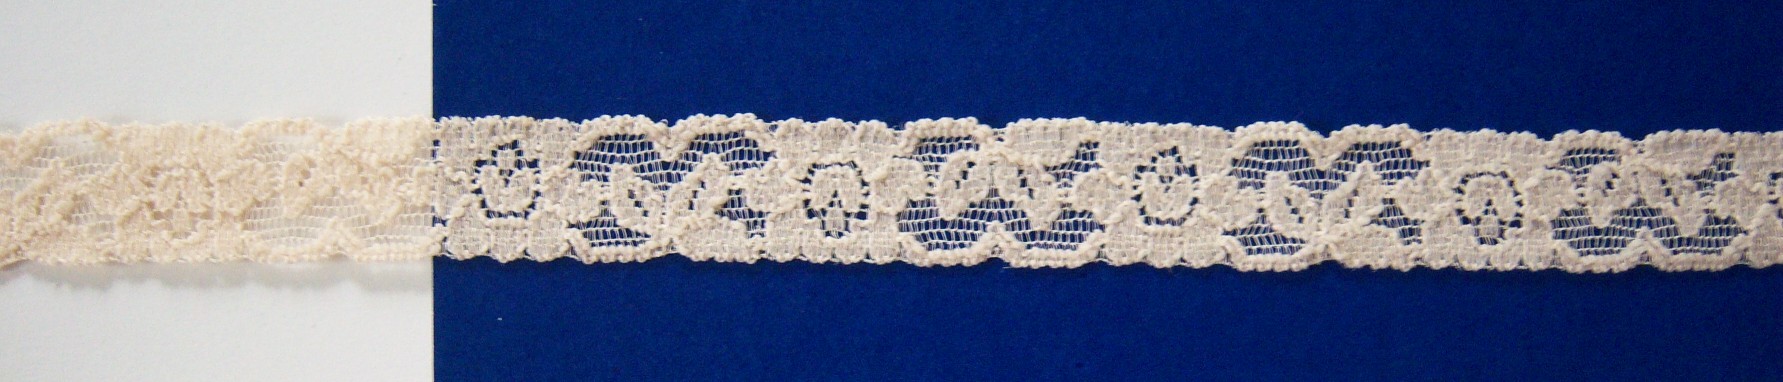 New Van Nude 3/4" Stretch Lace